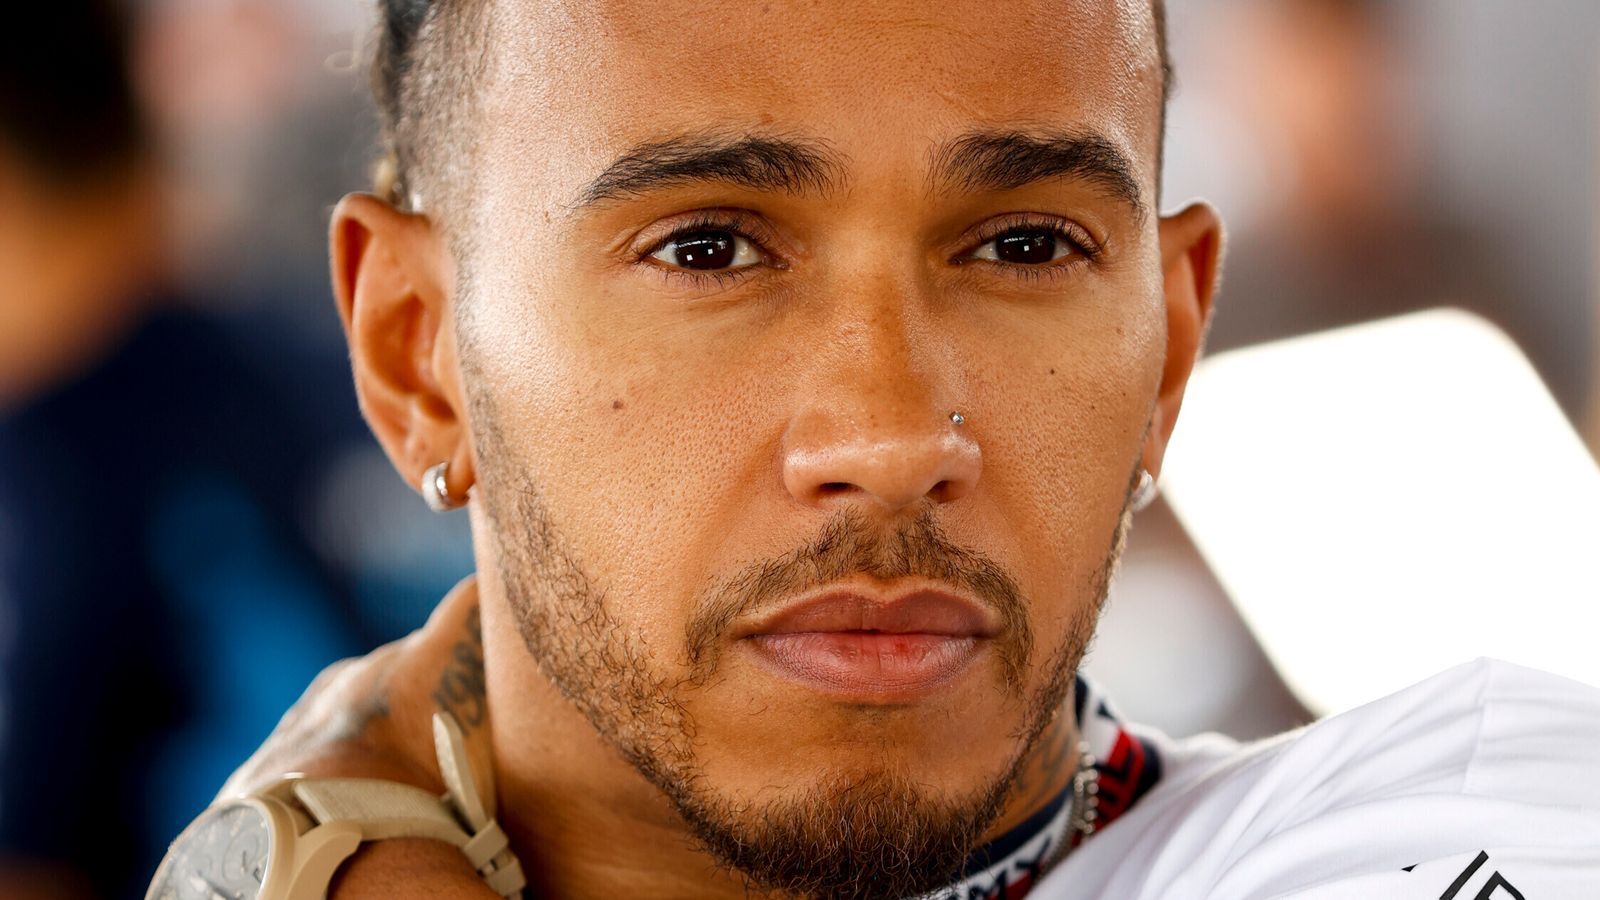 Lewis Hamilton describes Mercedes as ‘undriveable’ and a ‘disaster’ after Canadian Grand Prix practice sessions